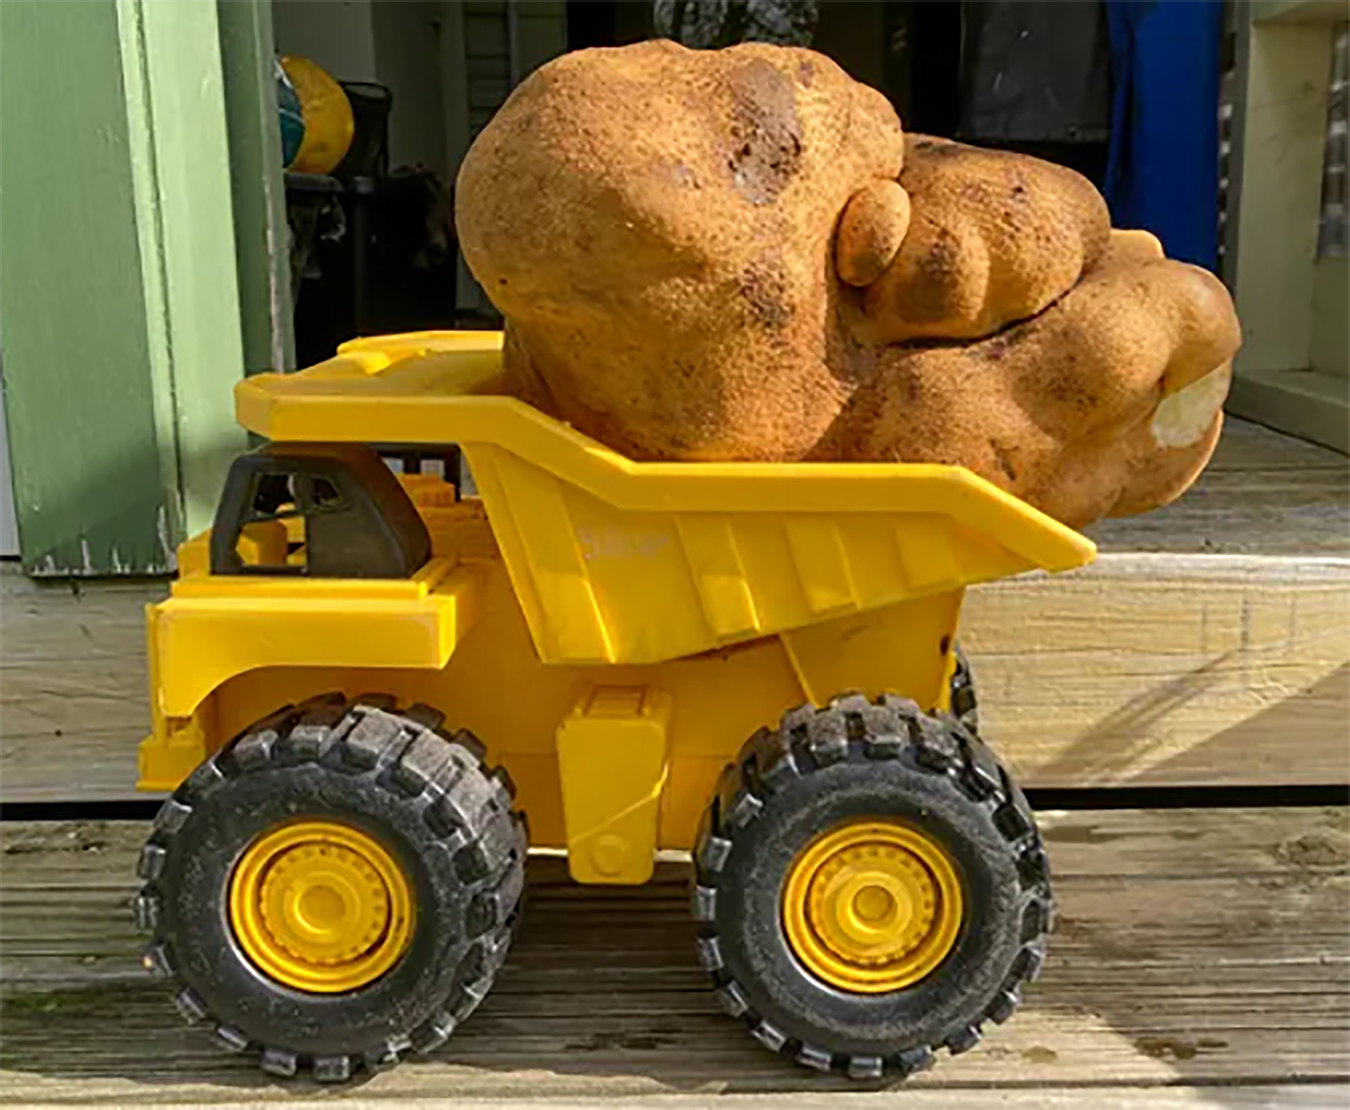 A large potato sits on a kitchen sink at Donna and Colin Craig-Brown's home near Hamilton, N.Z., Monday, Aug. 30, 2021. The New Zealand couple dug up a potato the size of a small dog in their backyard and have applied for recognition from Guinness World Records. They say it weighed in at 7.9 kg, well above the current record of just under 5 kg. They've named the potato Doug, because they dug it up.  Donna Craig-Brown via AP